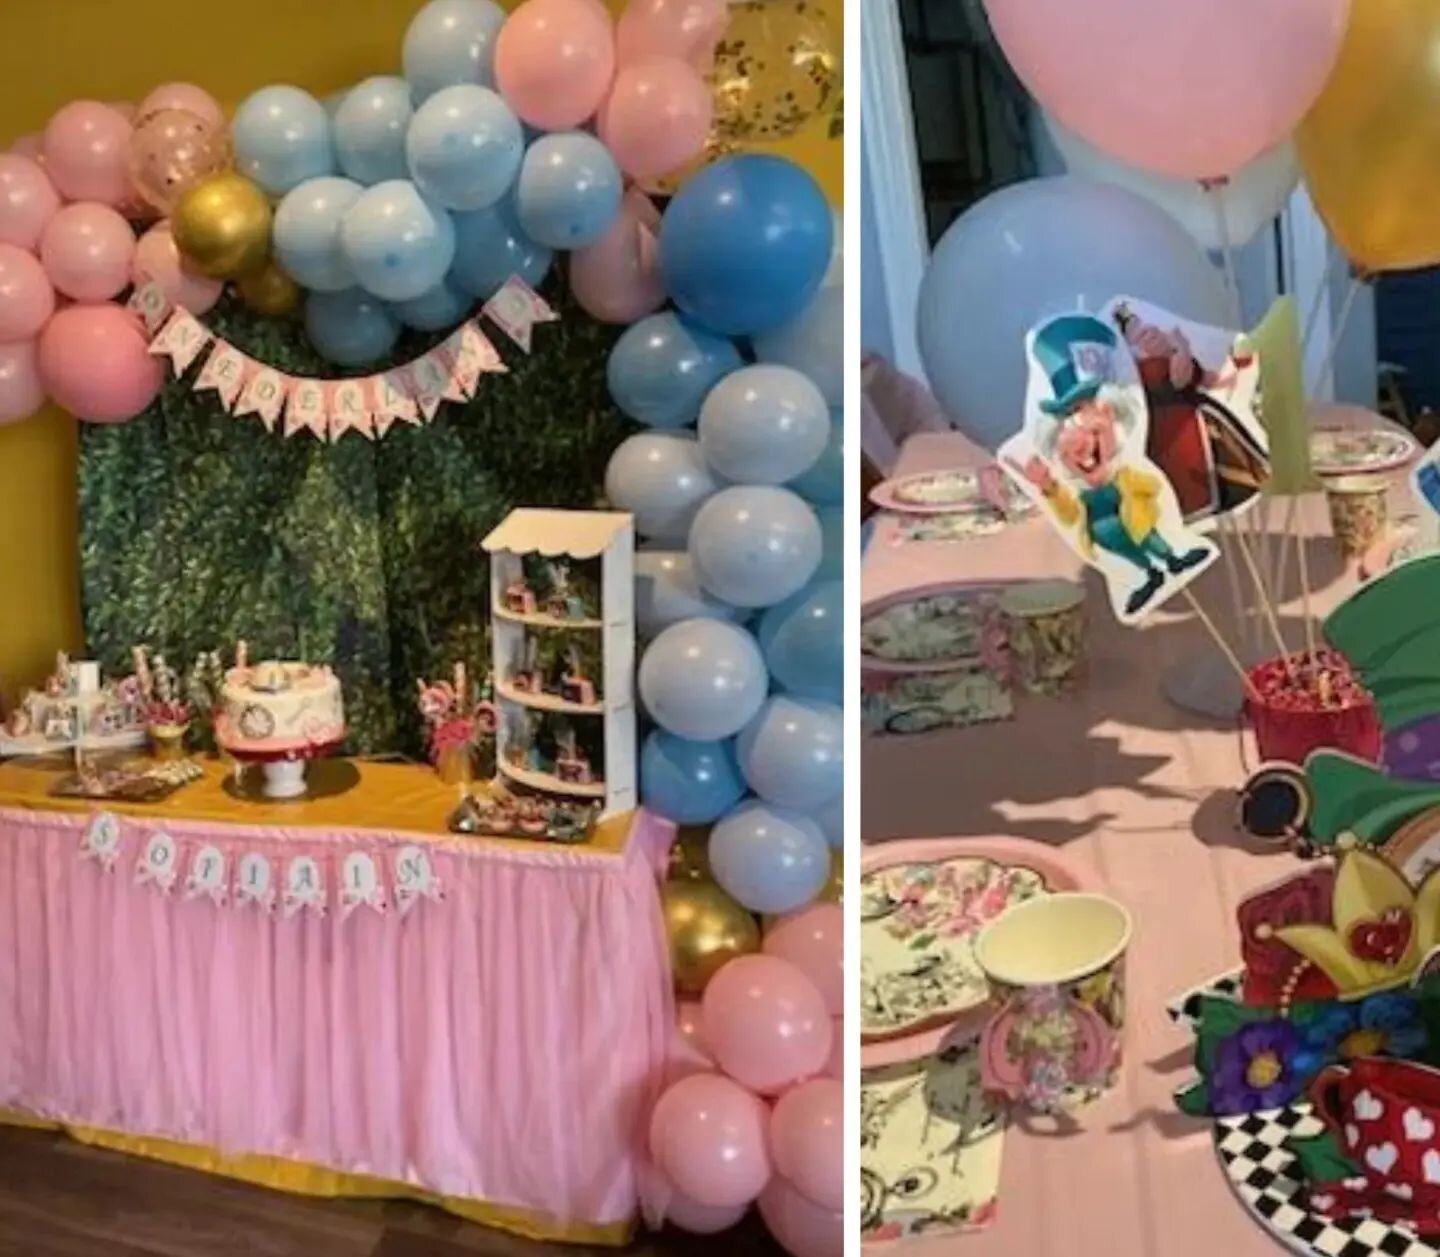 We were so enamored with this Sofia in #Onderland theme. We love a good #teaparty

Happy #1stbirthday Sofia! We loved celebrating with you!

#chicagokidsbirthdayparties #chicagokidsparties #chicagopartyplanner #indoorplayroom #chicagoplayroom #buckto